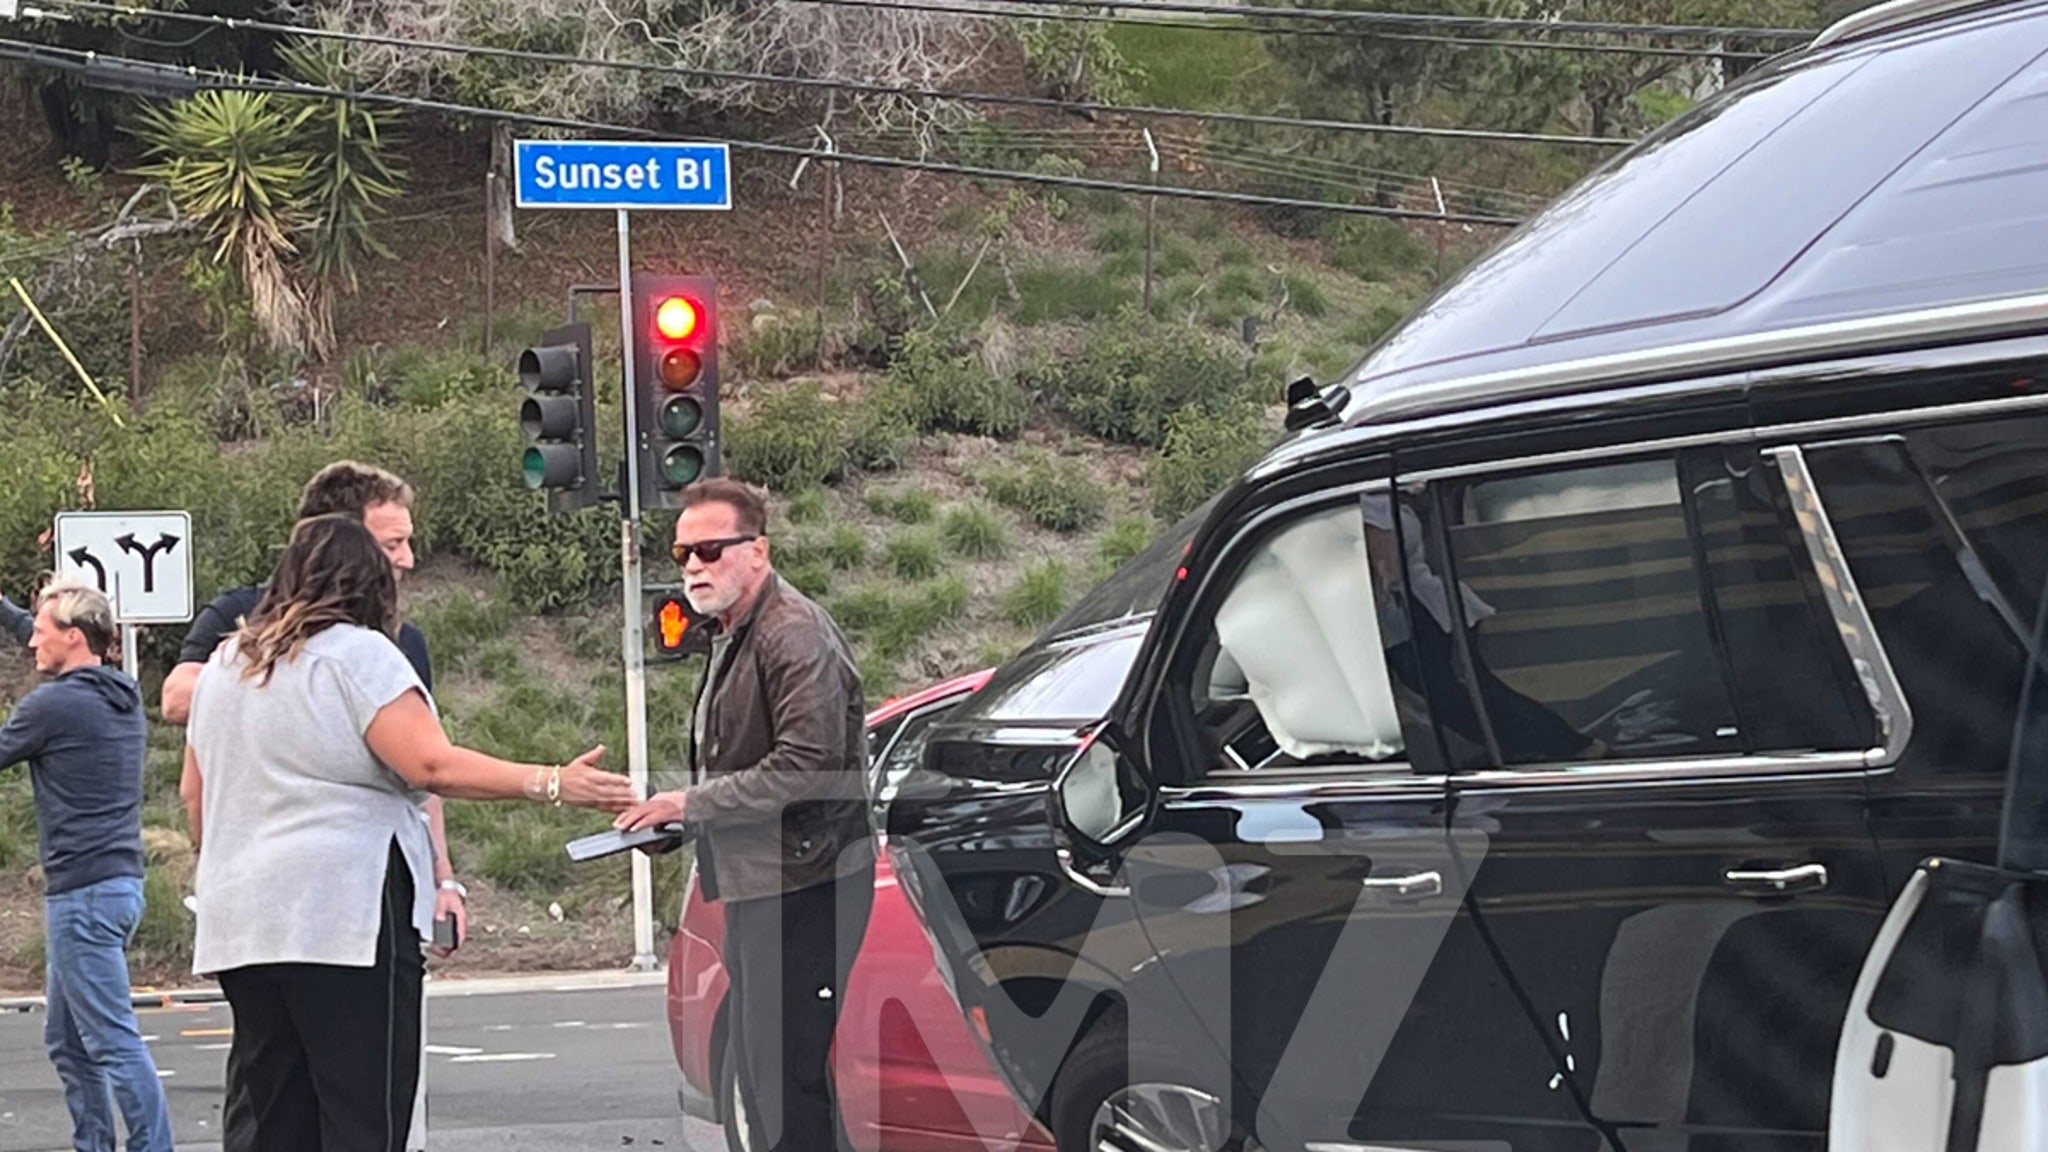 Arnold Schwarzenegger Involved in Bad Car Accident with Injuries thumbnail